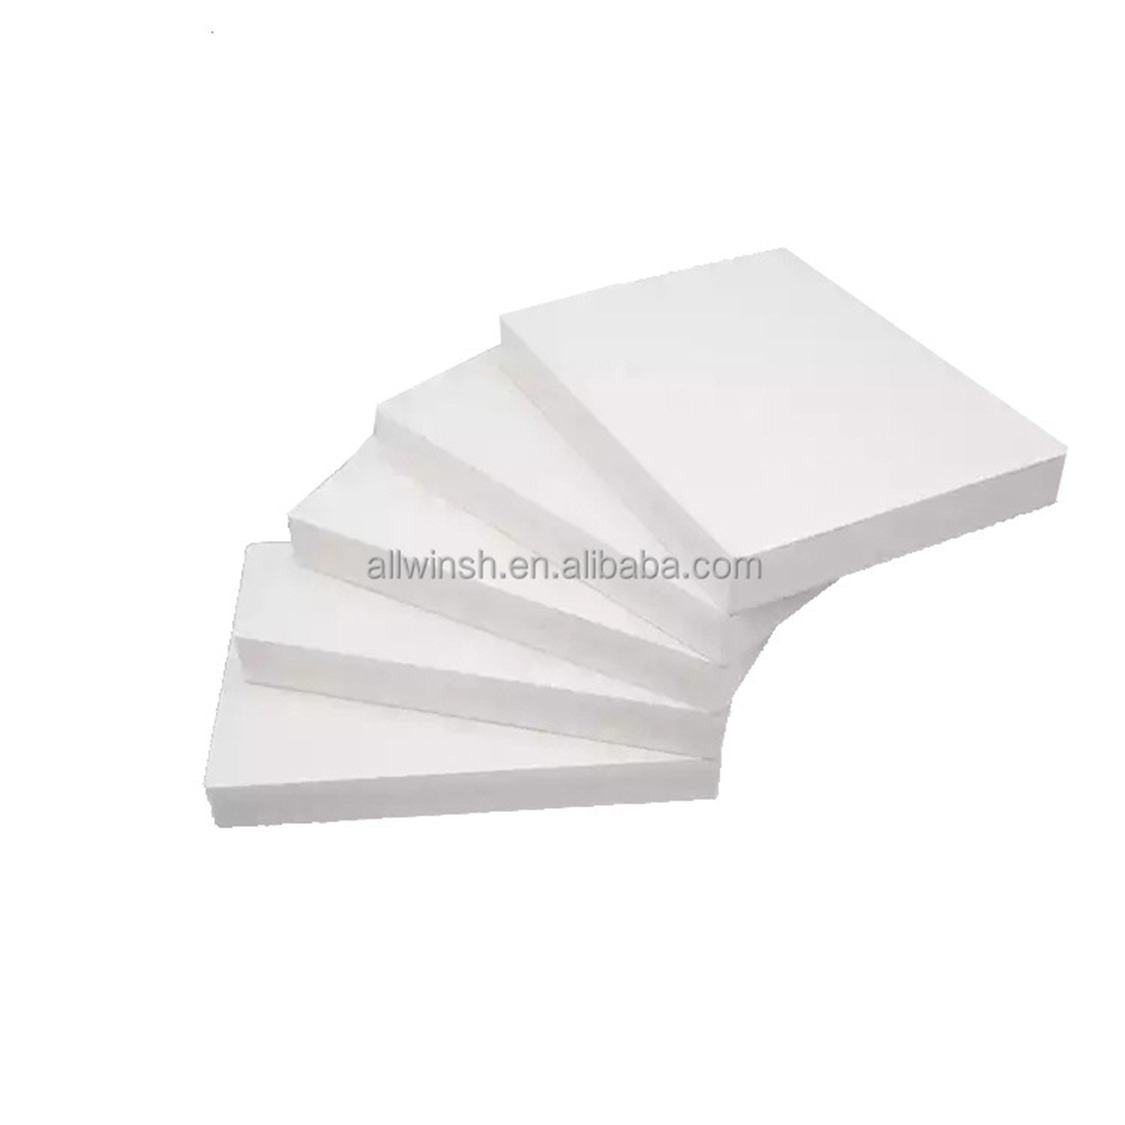 Free Waterproof Rigid Pvc Custom Wpc Celuka 6mm And 8mm Foam Board for Advertising Or Furniture Or Decoration